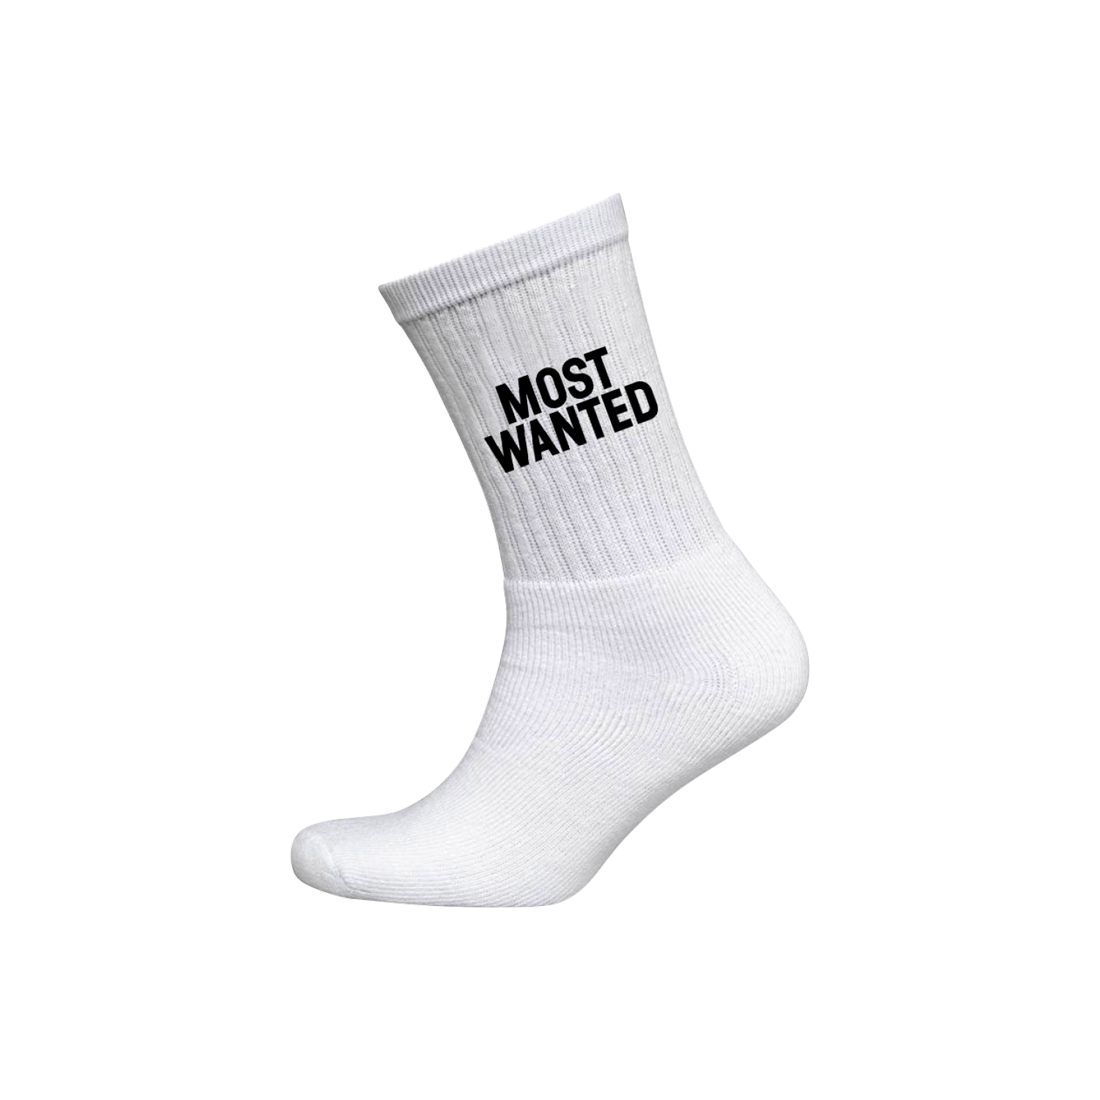 The Wanted - Most Wanted Socks